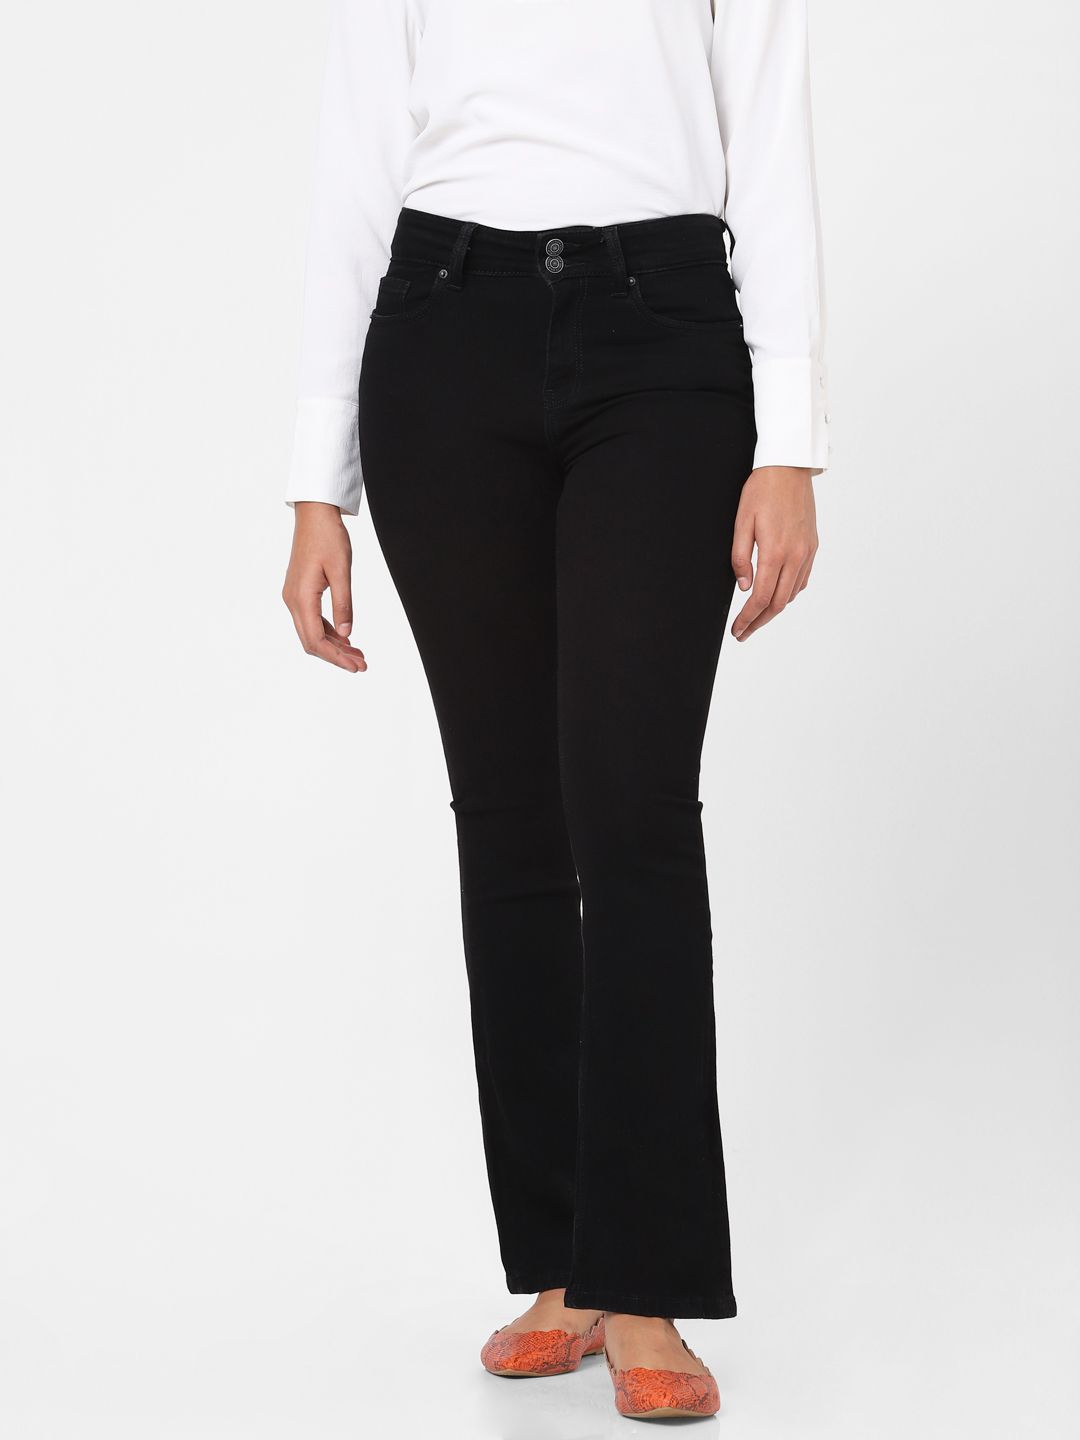 Vero Moda Women Black Bootcut High-Rise Stretchable Jeans Price in India